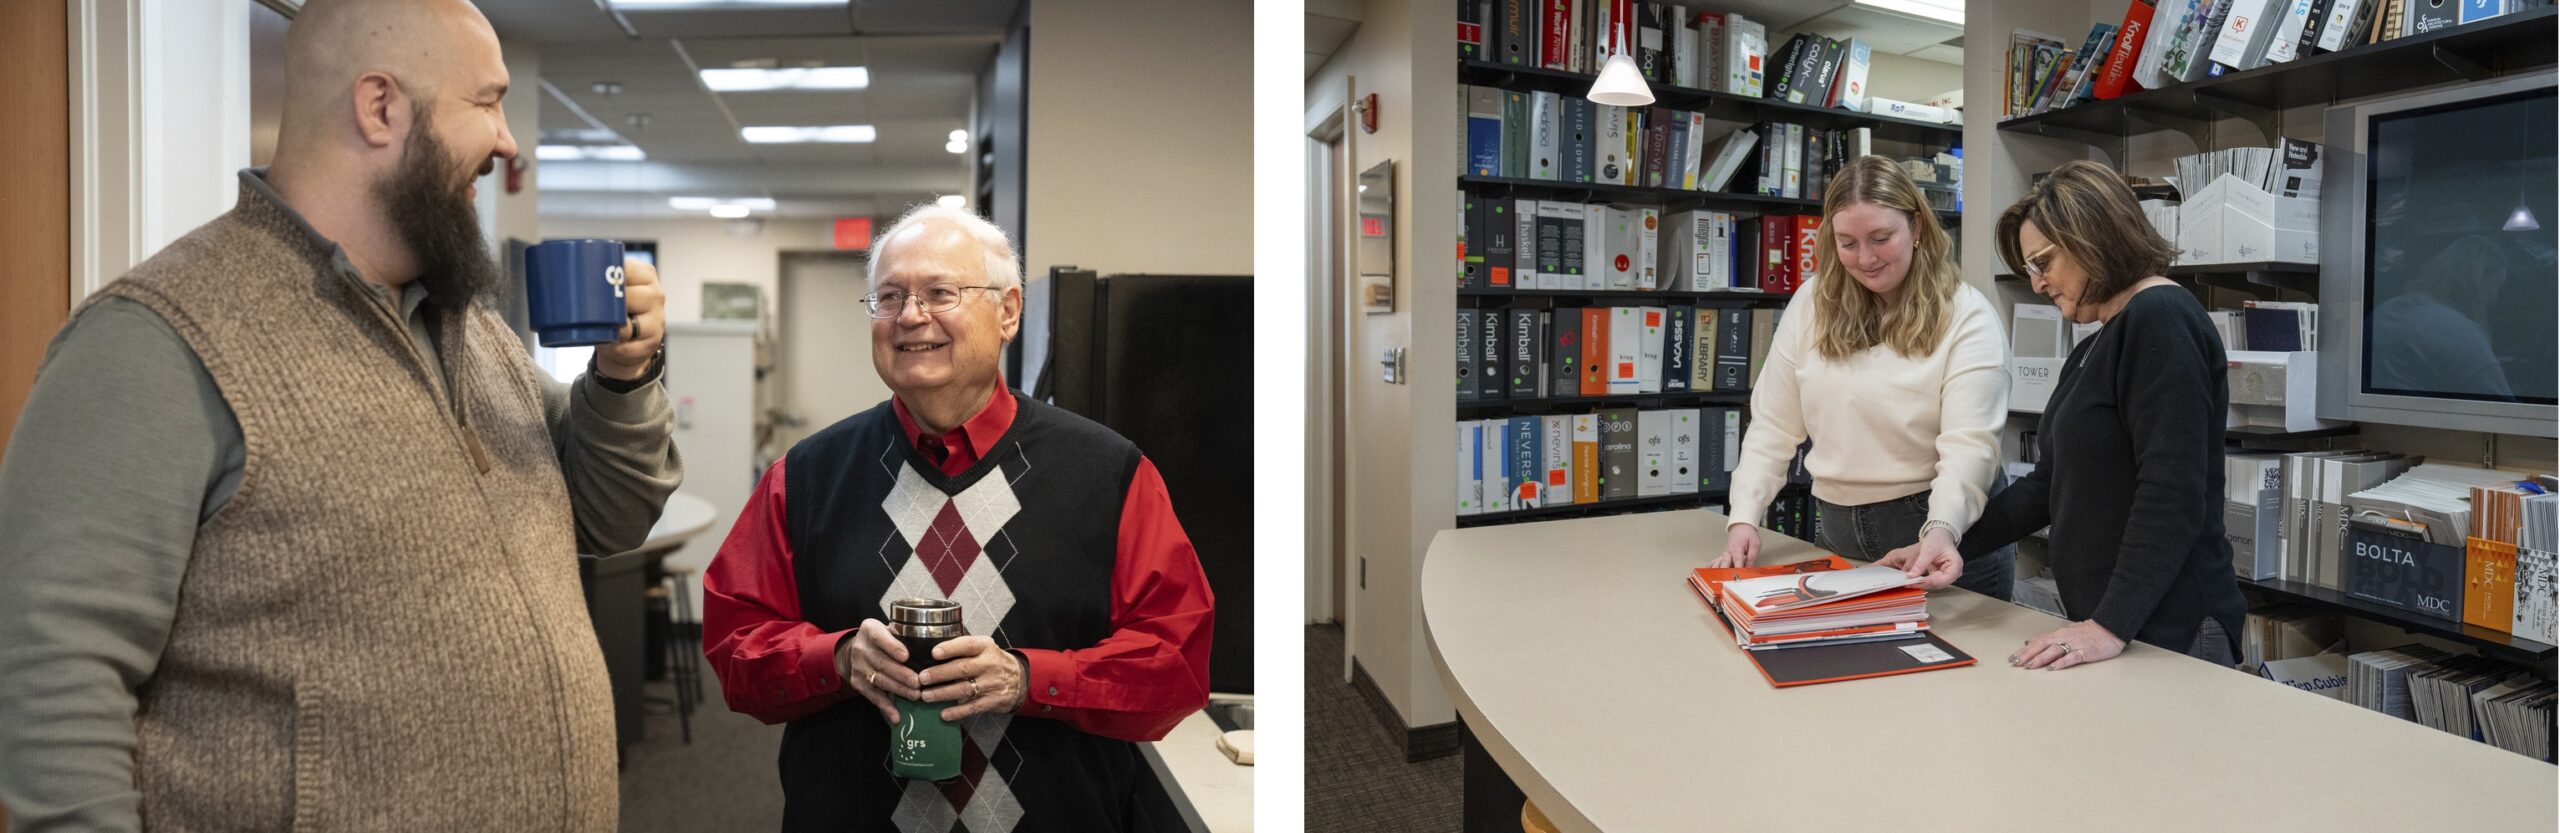 Two images side by side. On the left, two smiling men in business casual attire drinking coffee at work. On the right, two women standing at a table, engaged in conversation and examining documents in the office's interior design library.